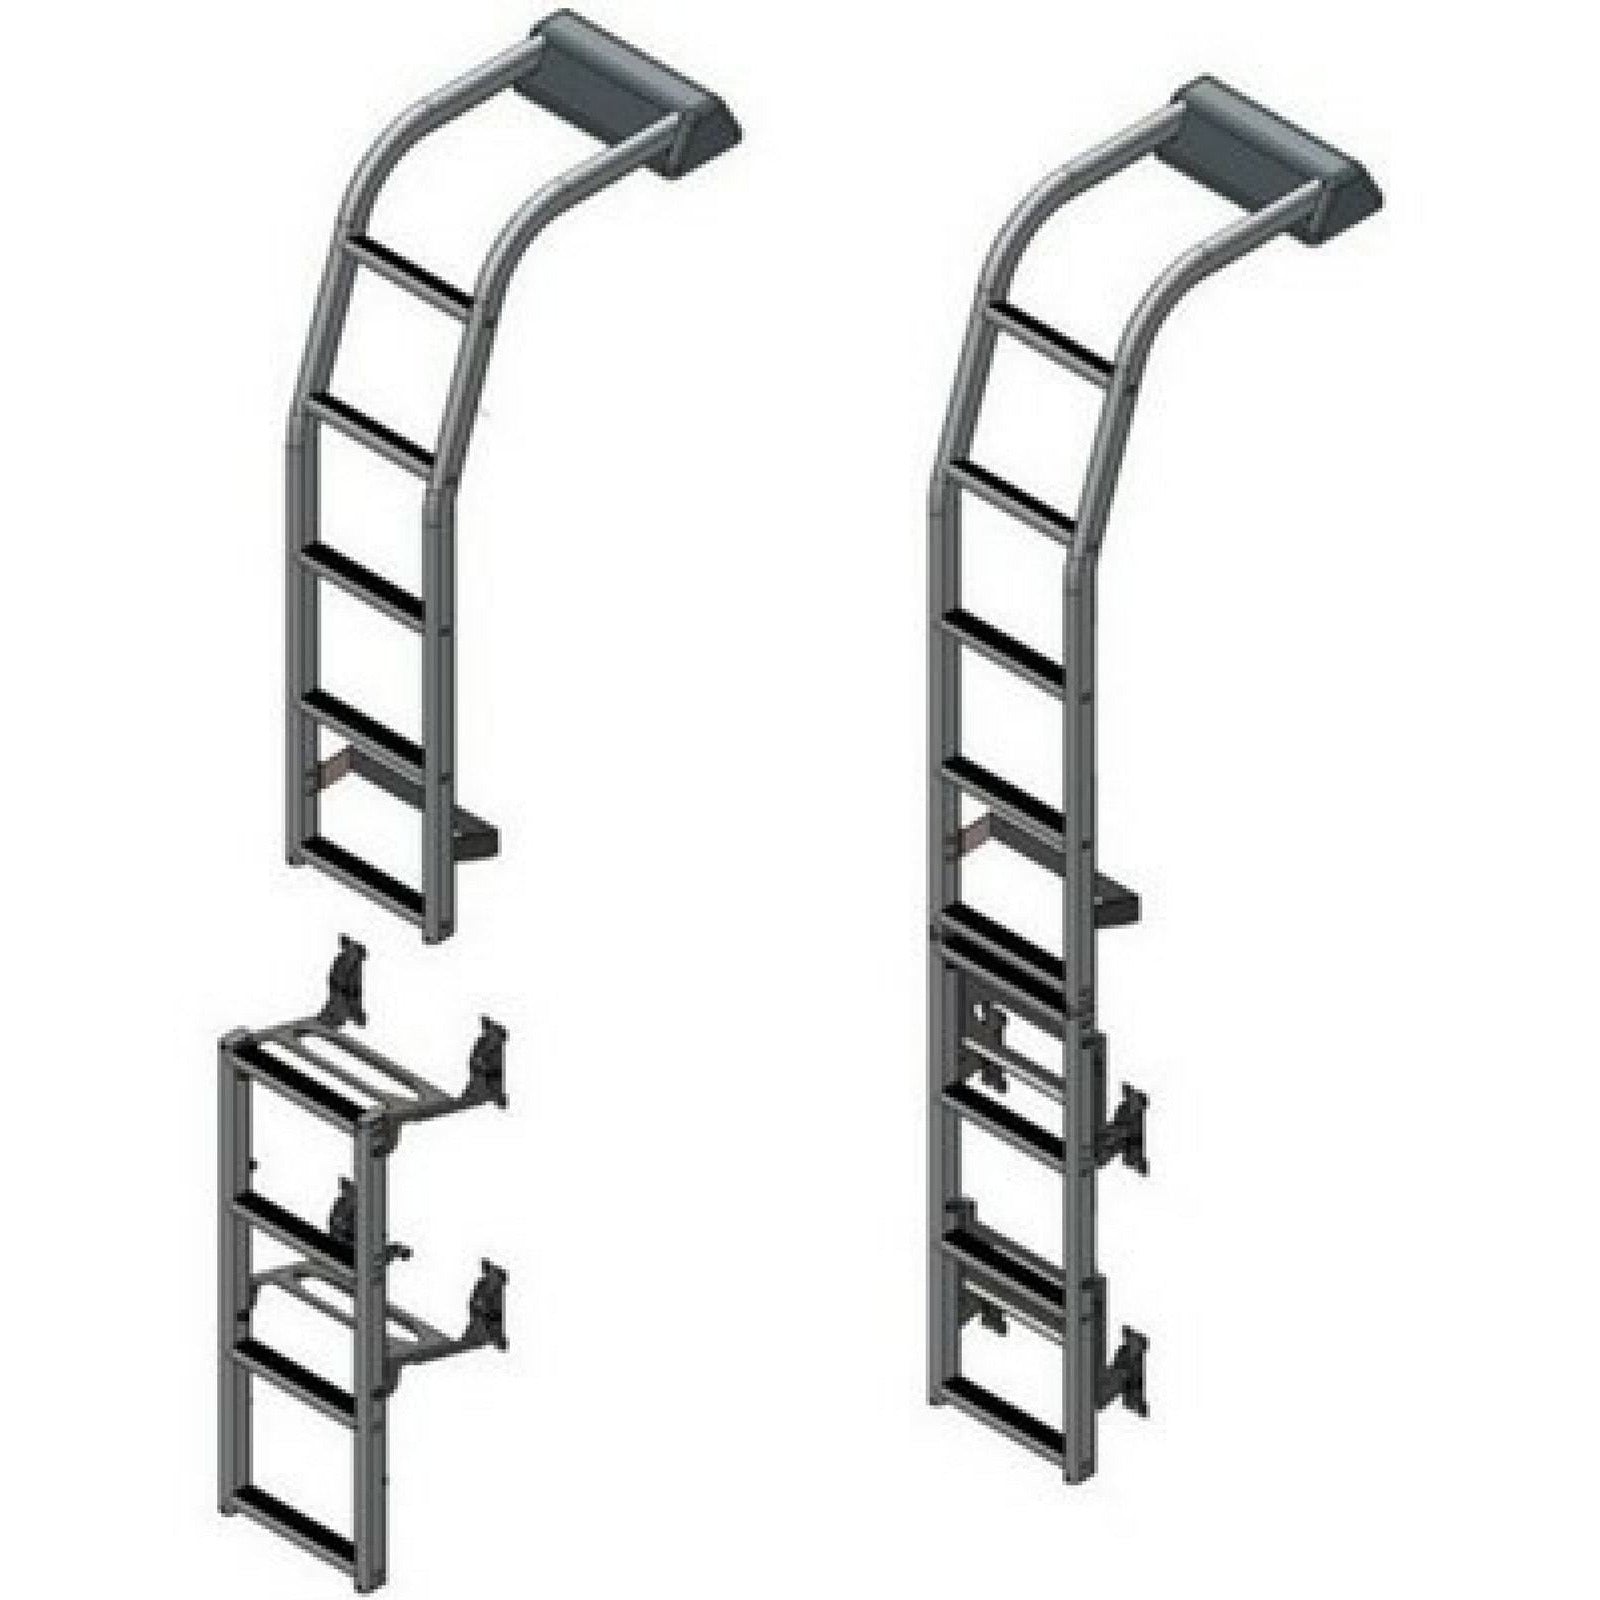 Project 2000 Two Part Ladder - Quality Caravan Awnings